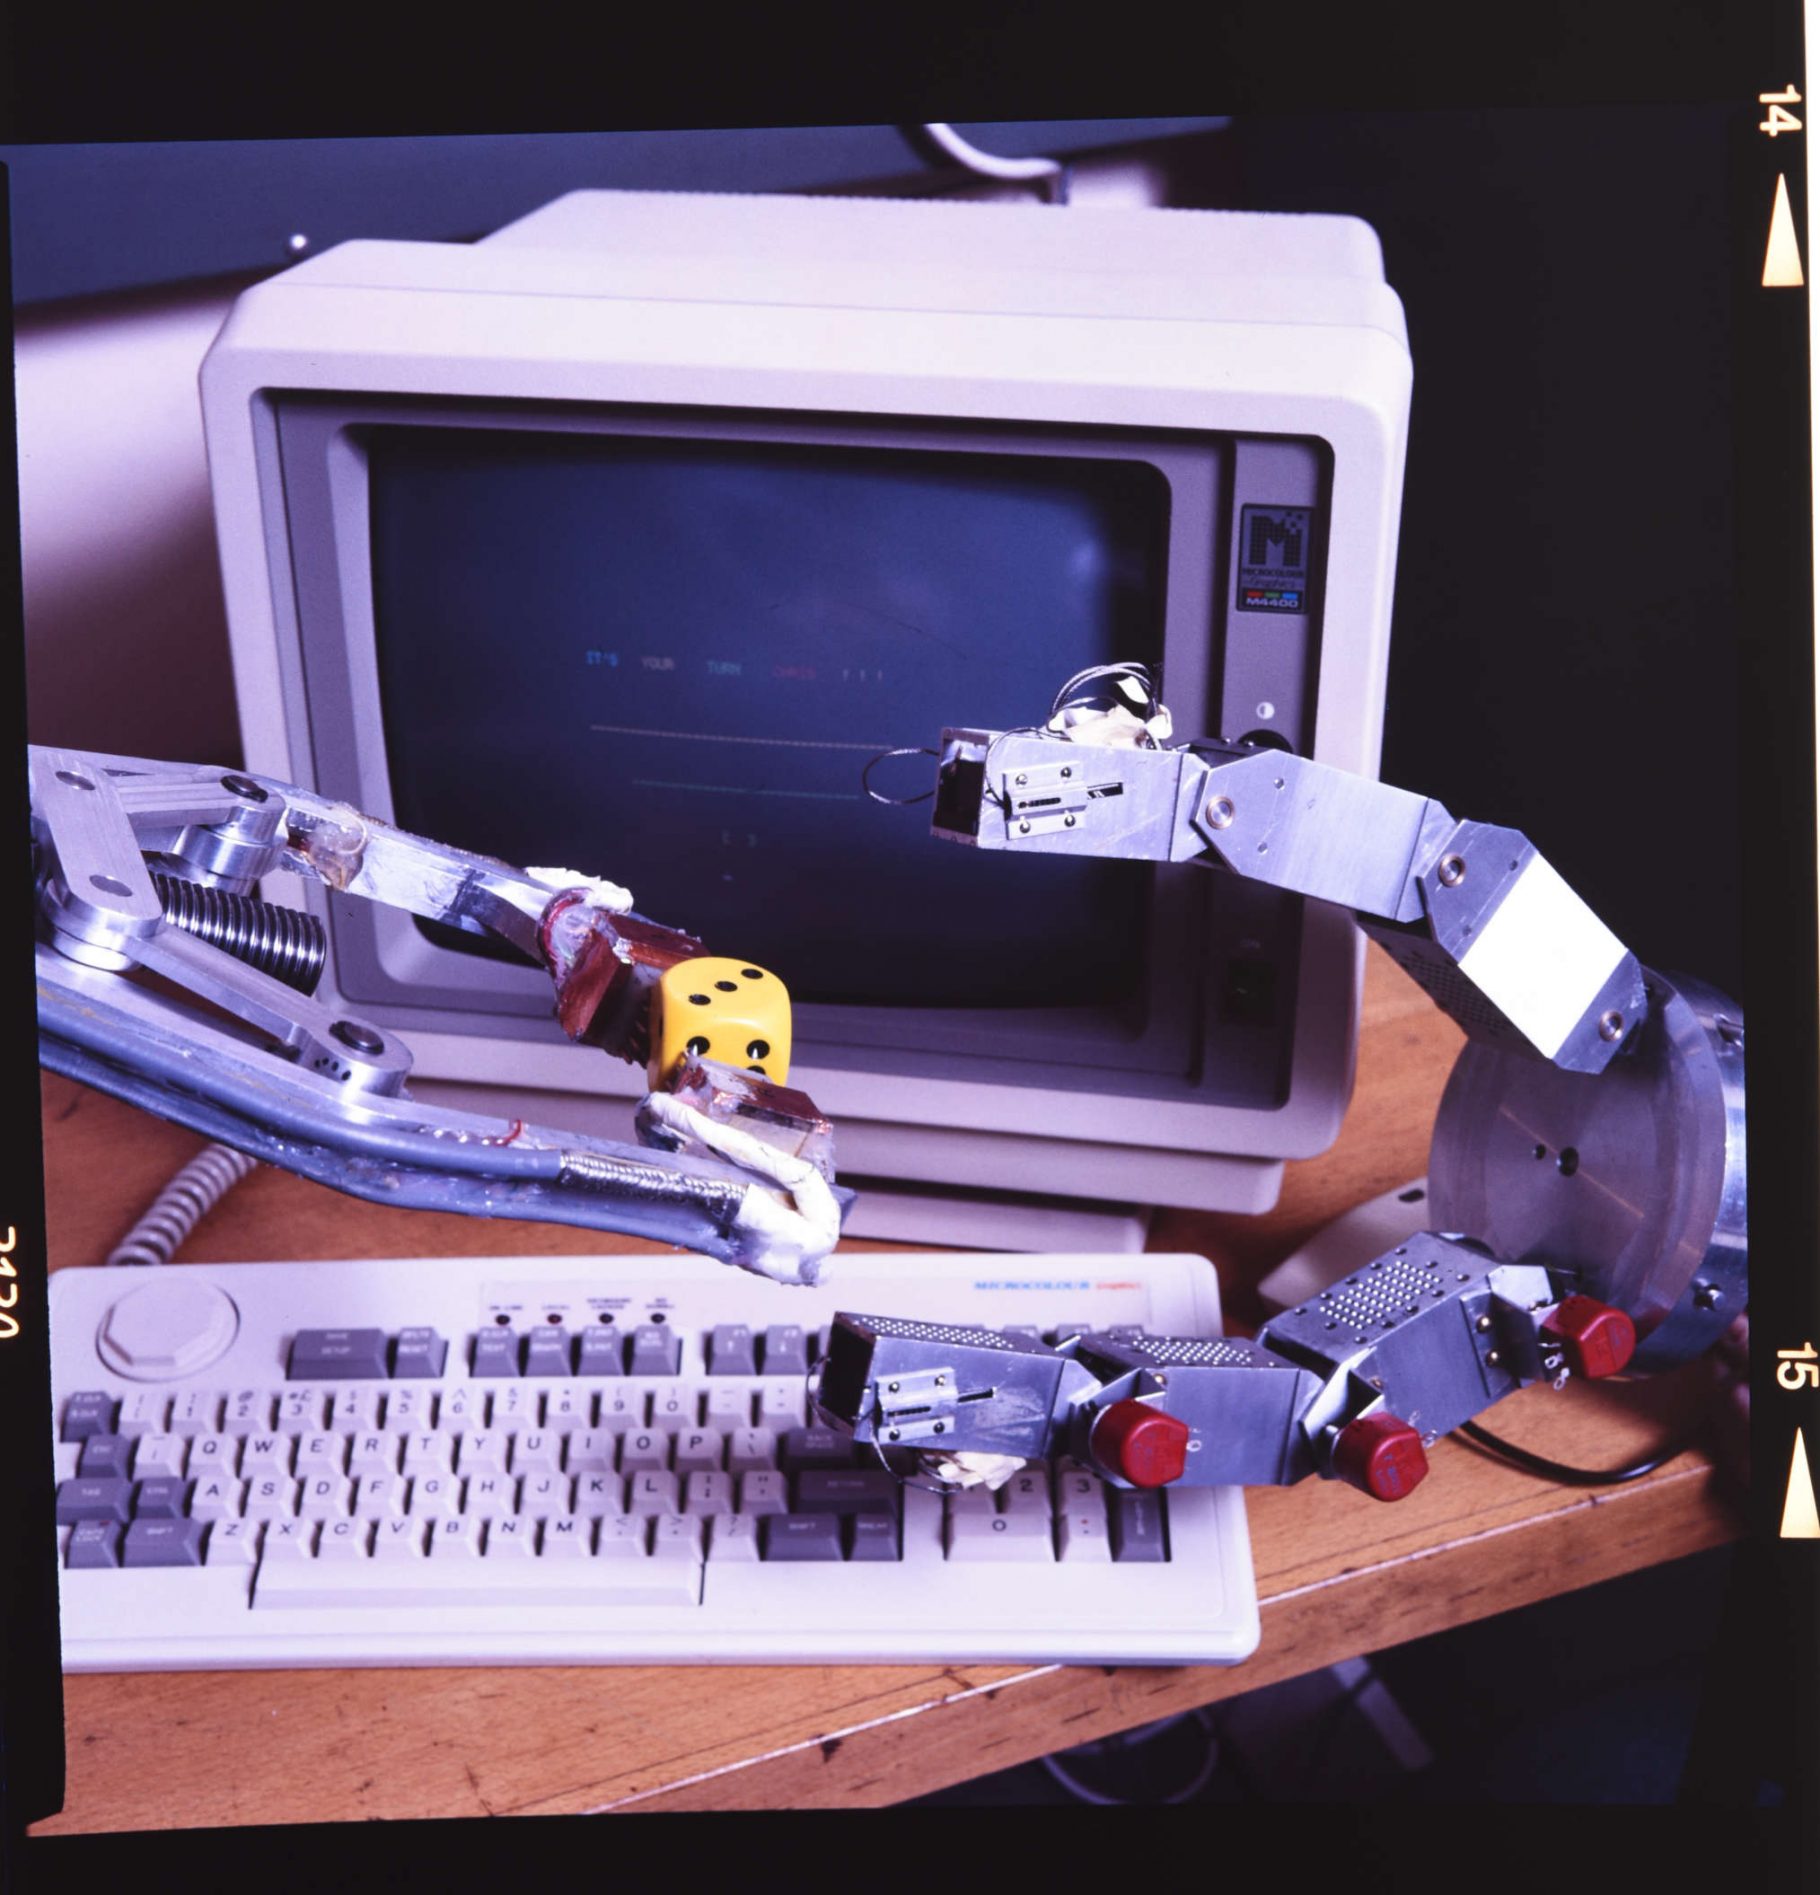 A simple robot hand holds a large die, while another looks poised to take it. In the background is a 1980s microcomputer.